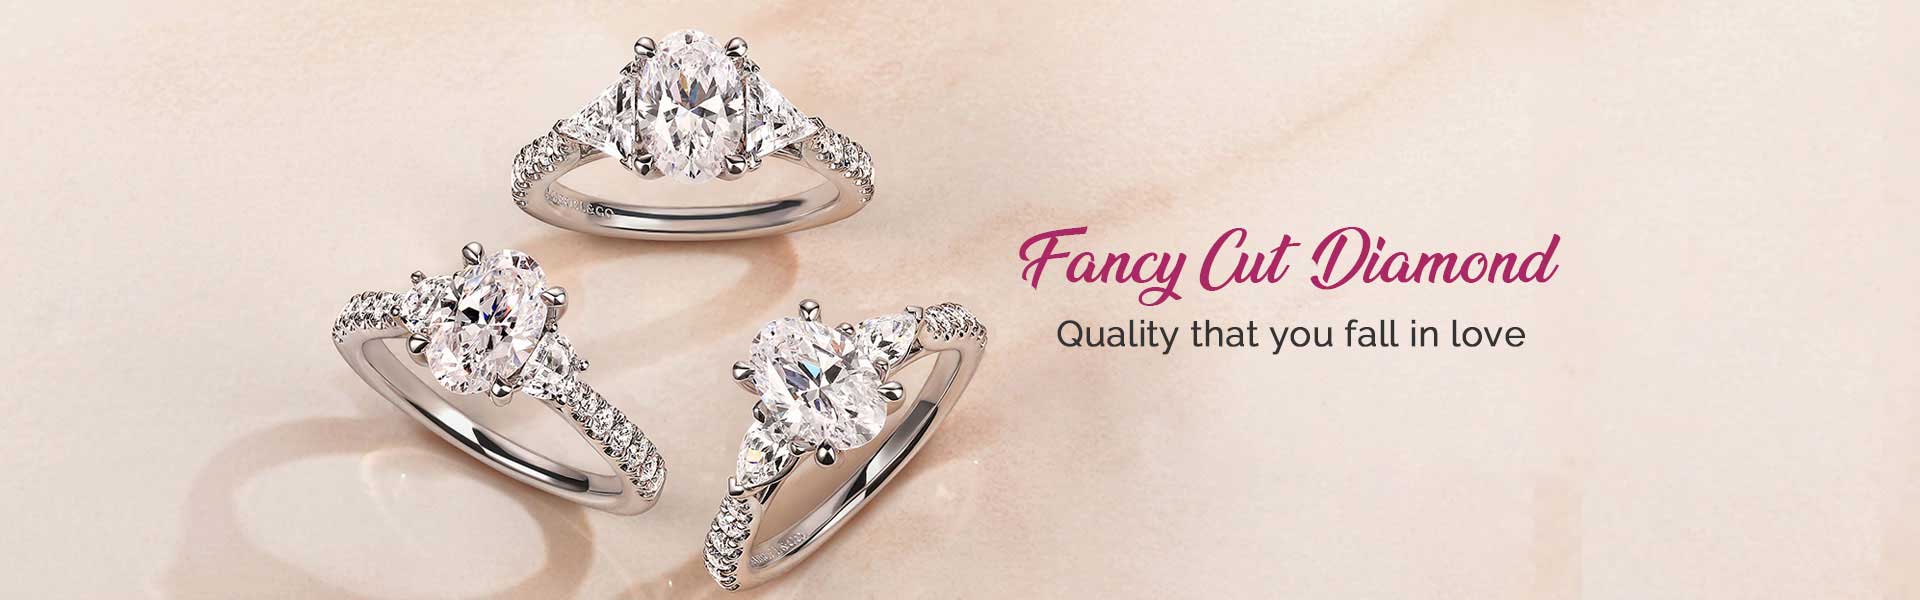  Fancy Cut Diamond  Manufacturers in Taito City